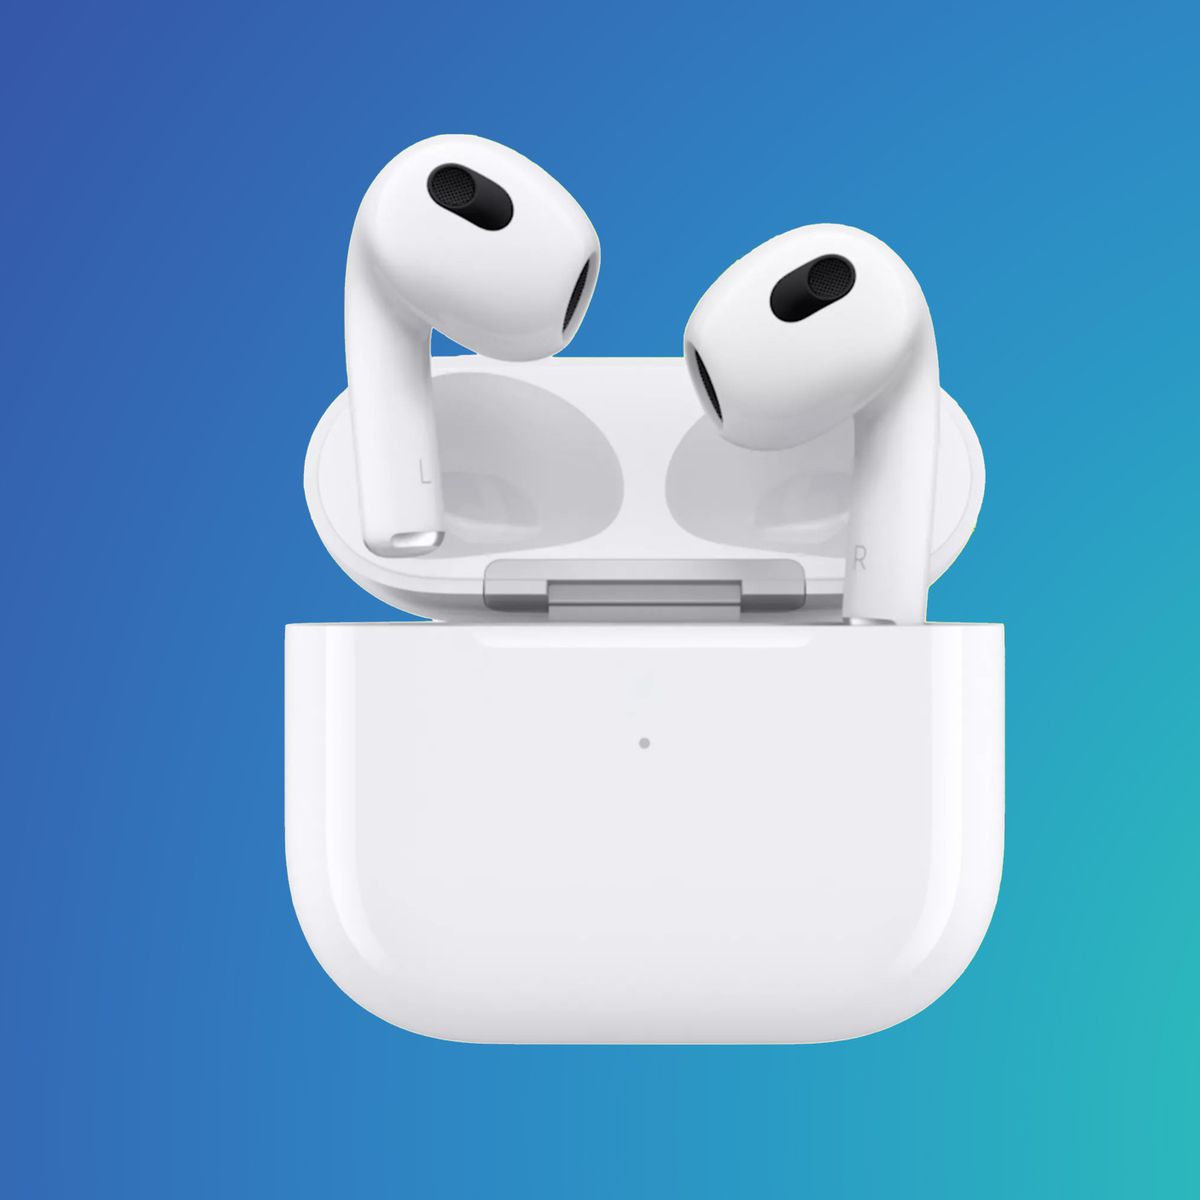 Apple Releases New Firmware for AirPods 3 - MacRumors